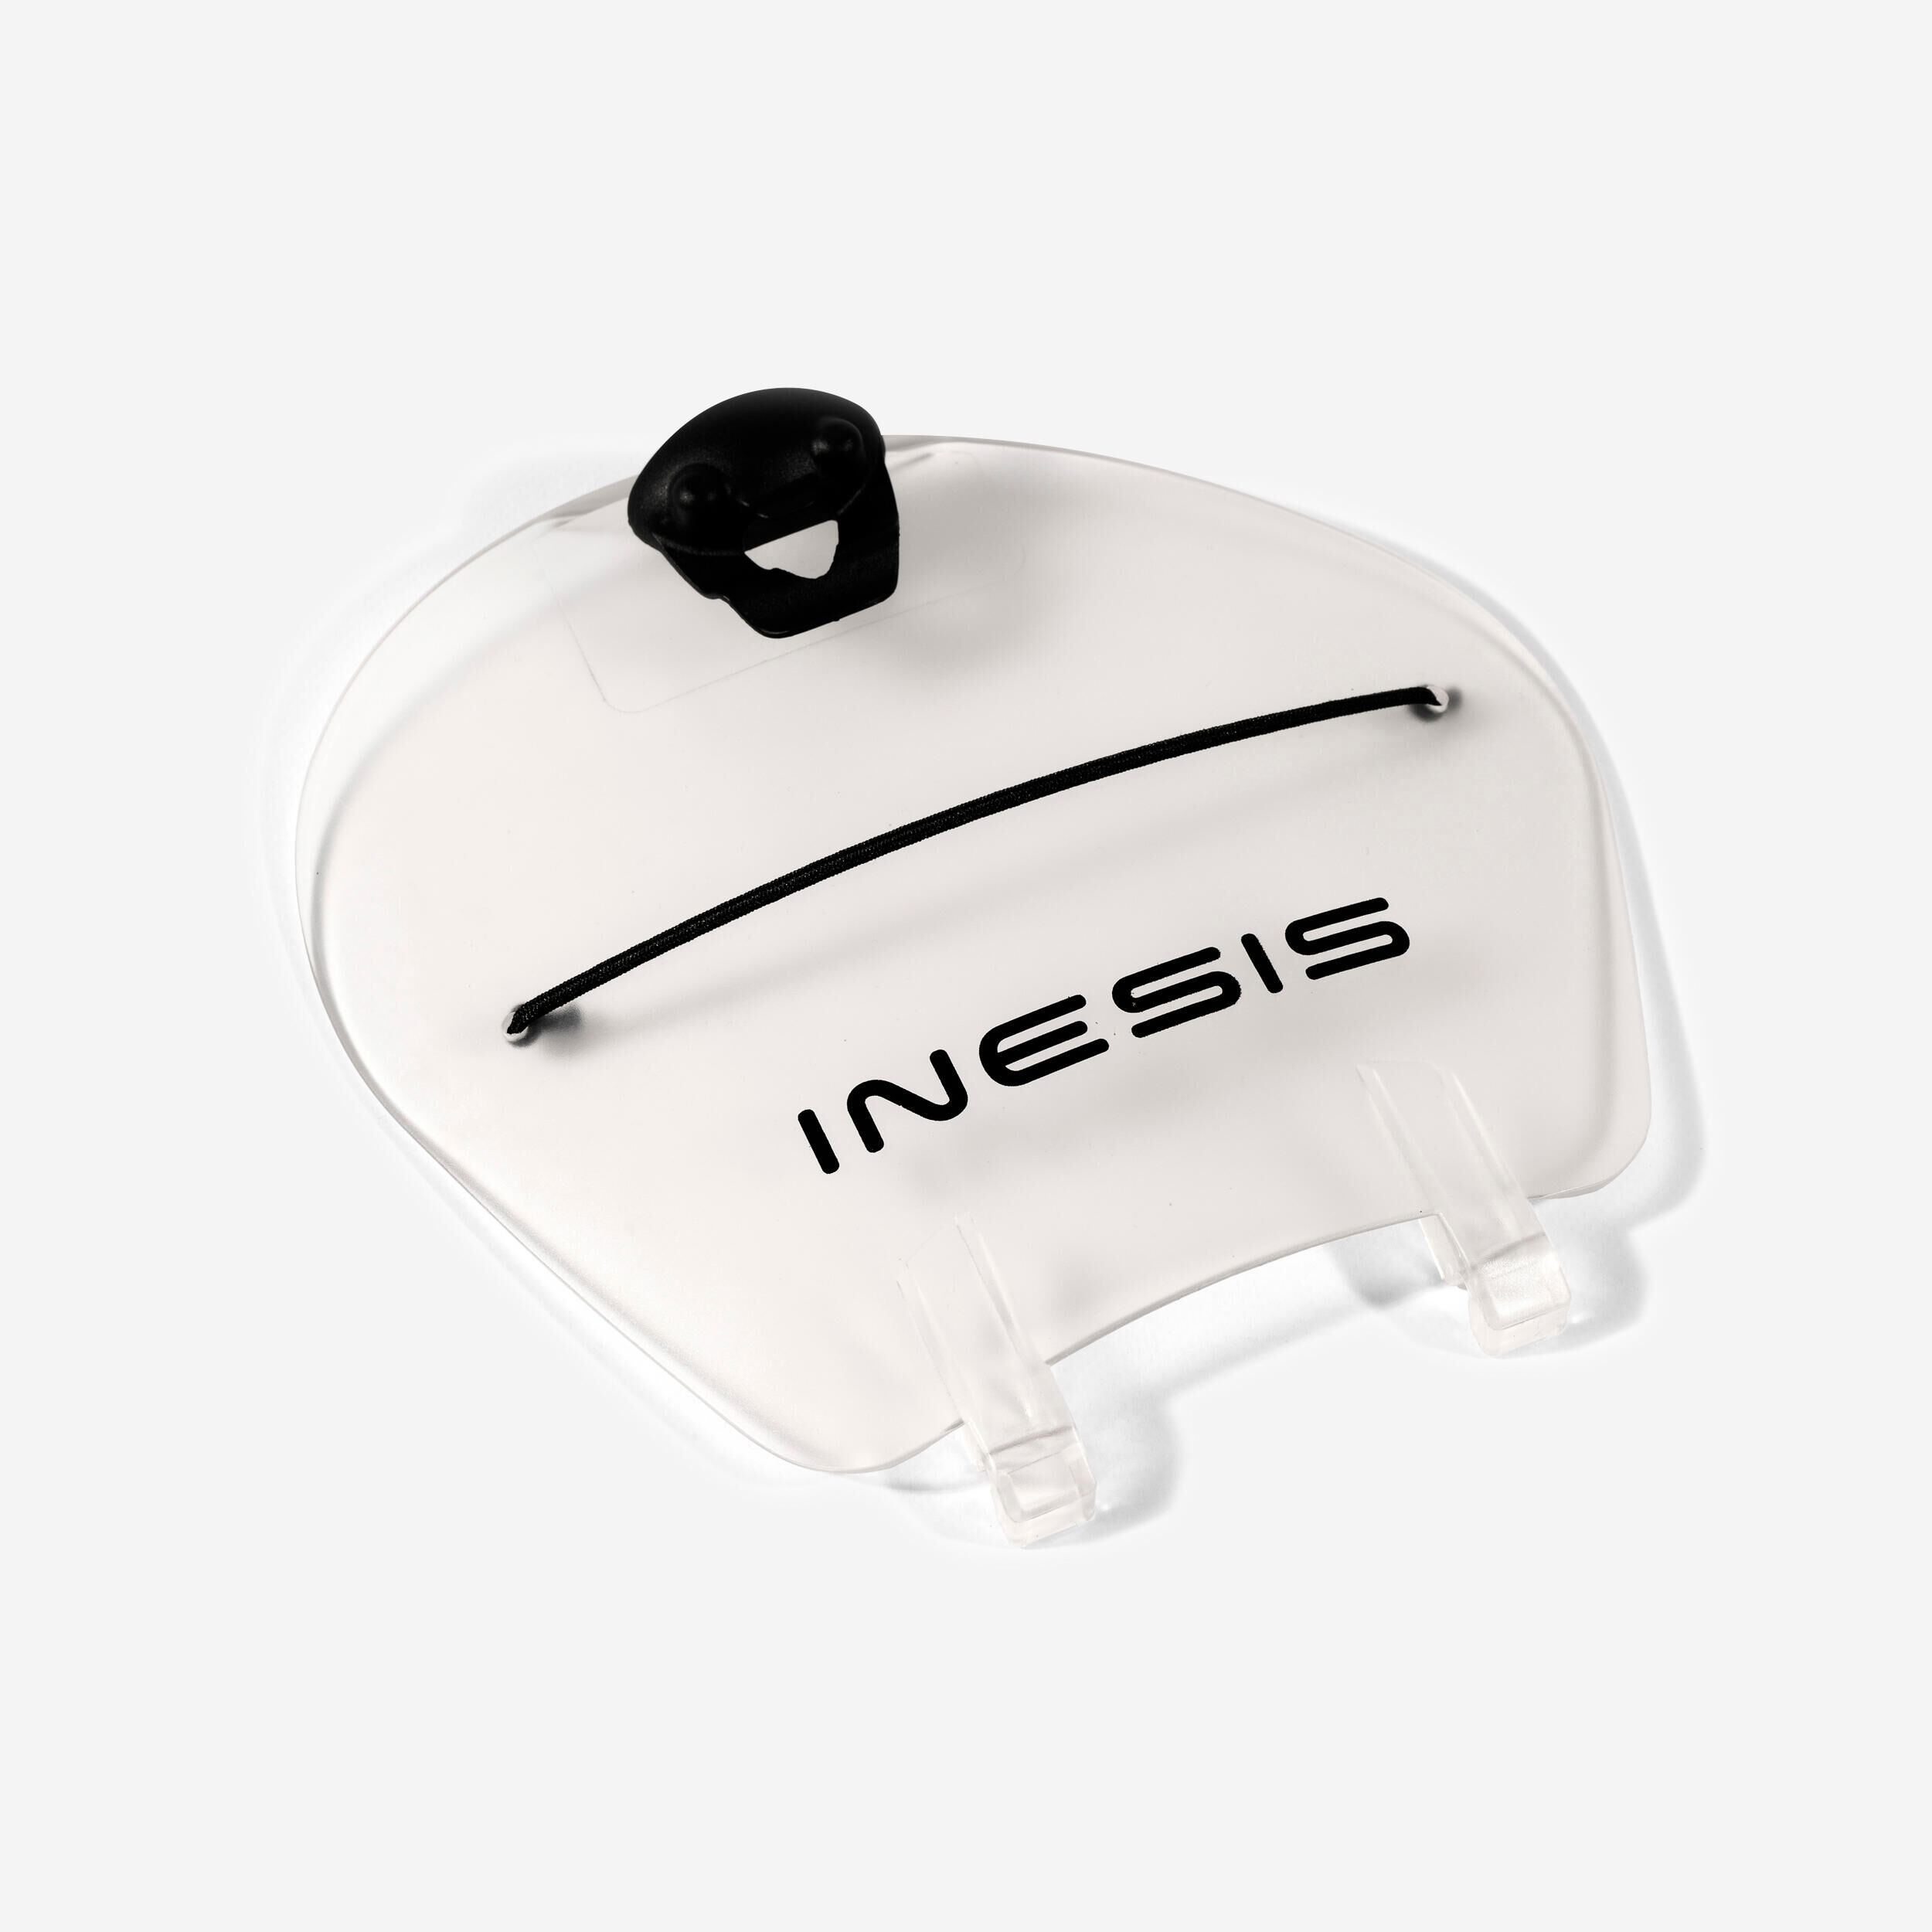 INESIS CONSOLE COVER FOR COMPACT 3-WHEEL GOLF TROLLEYS - INESIS